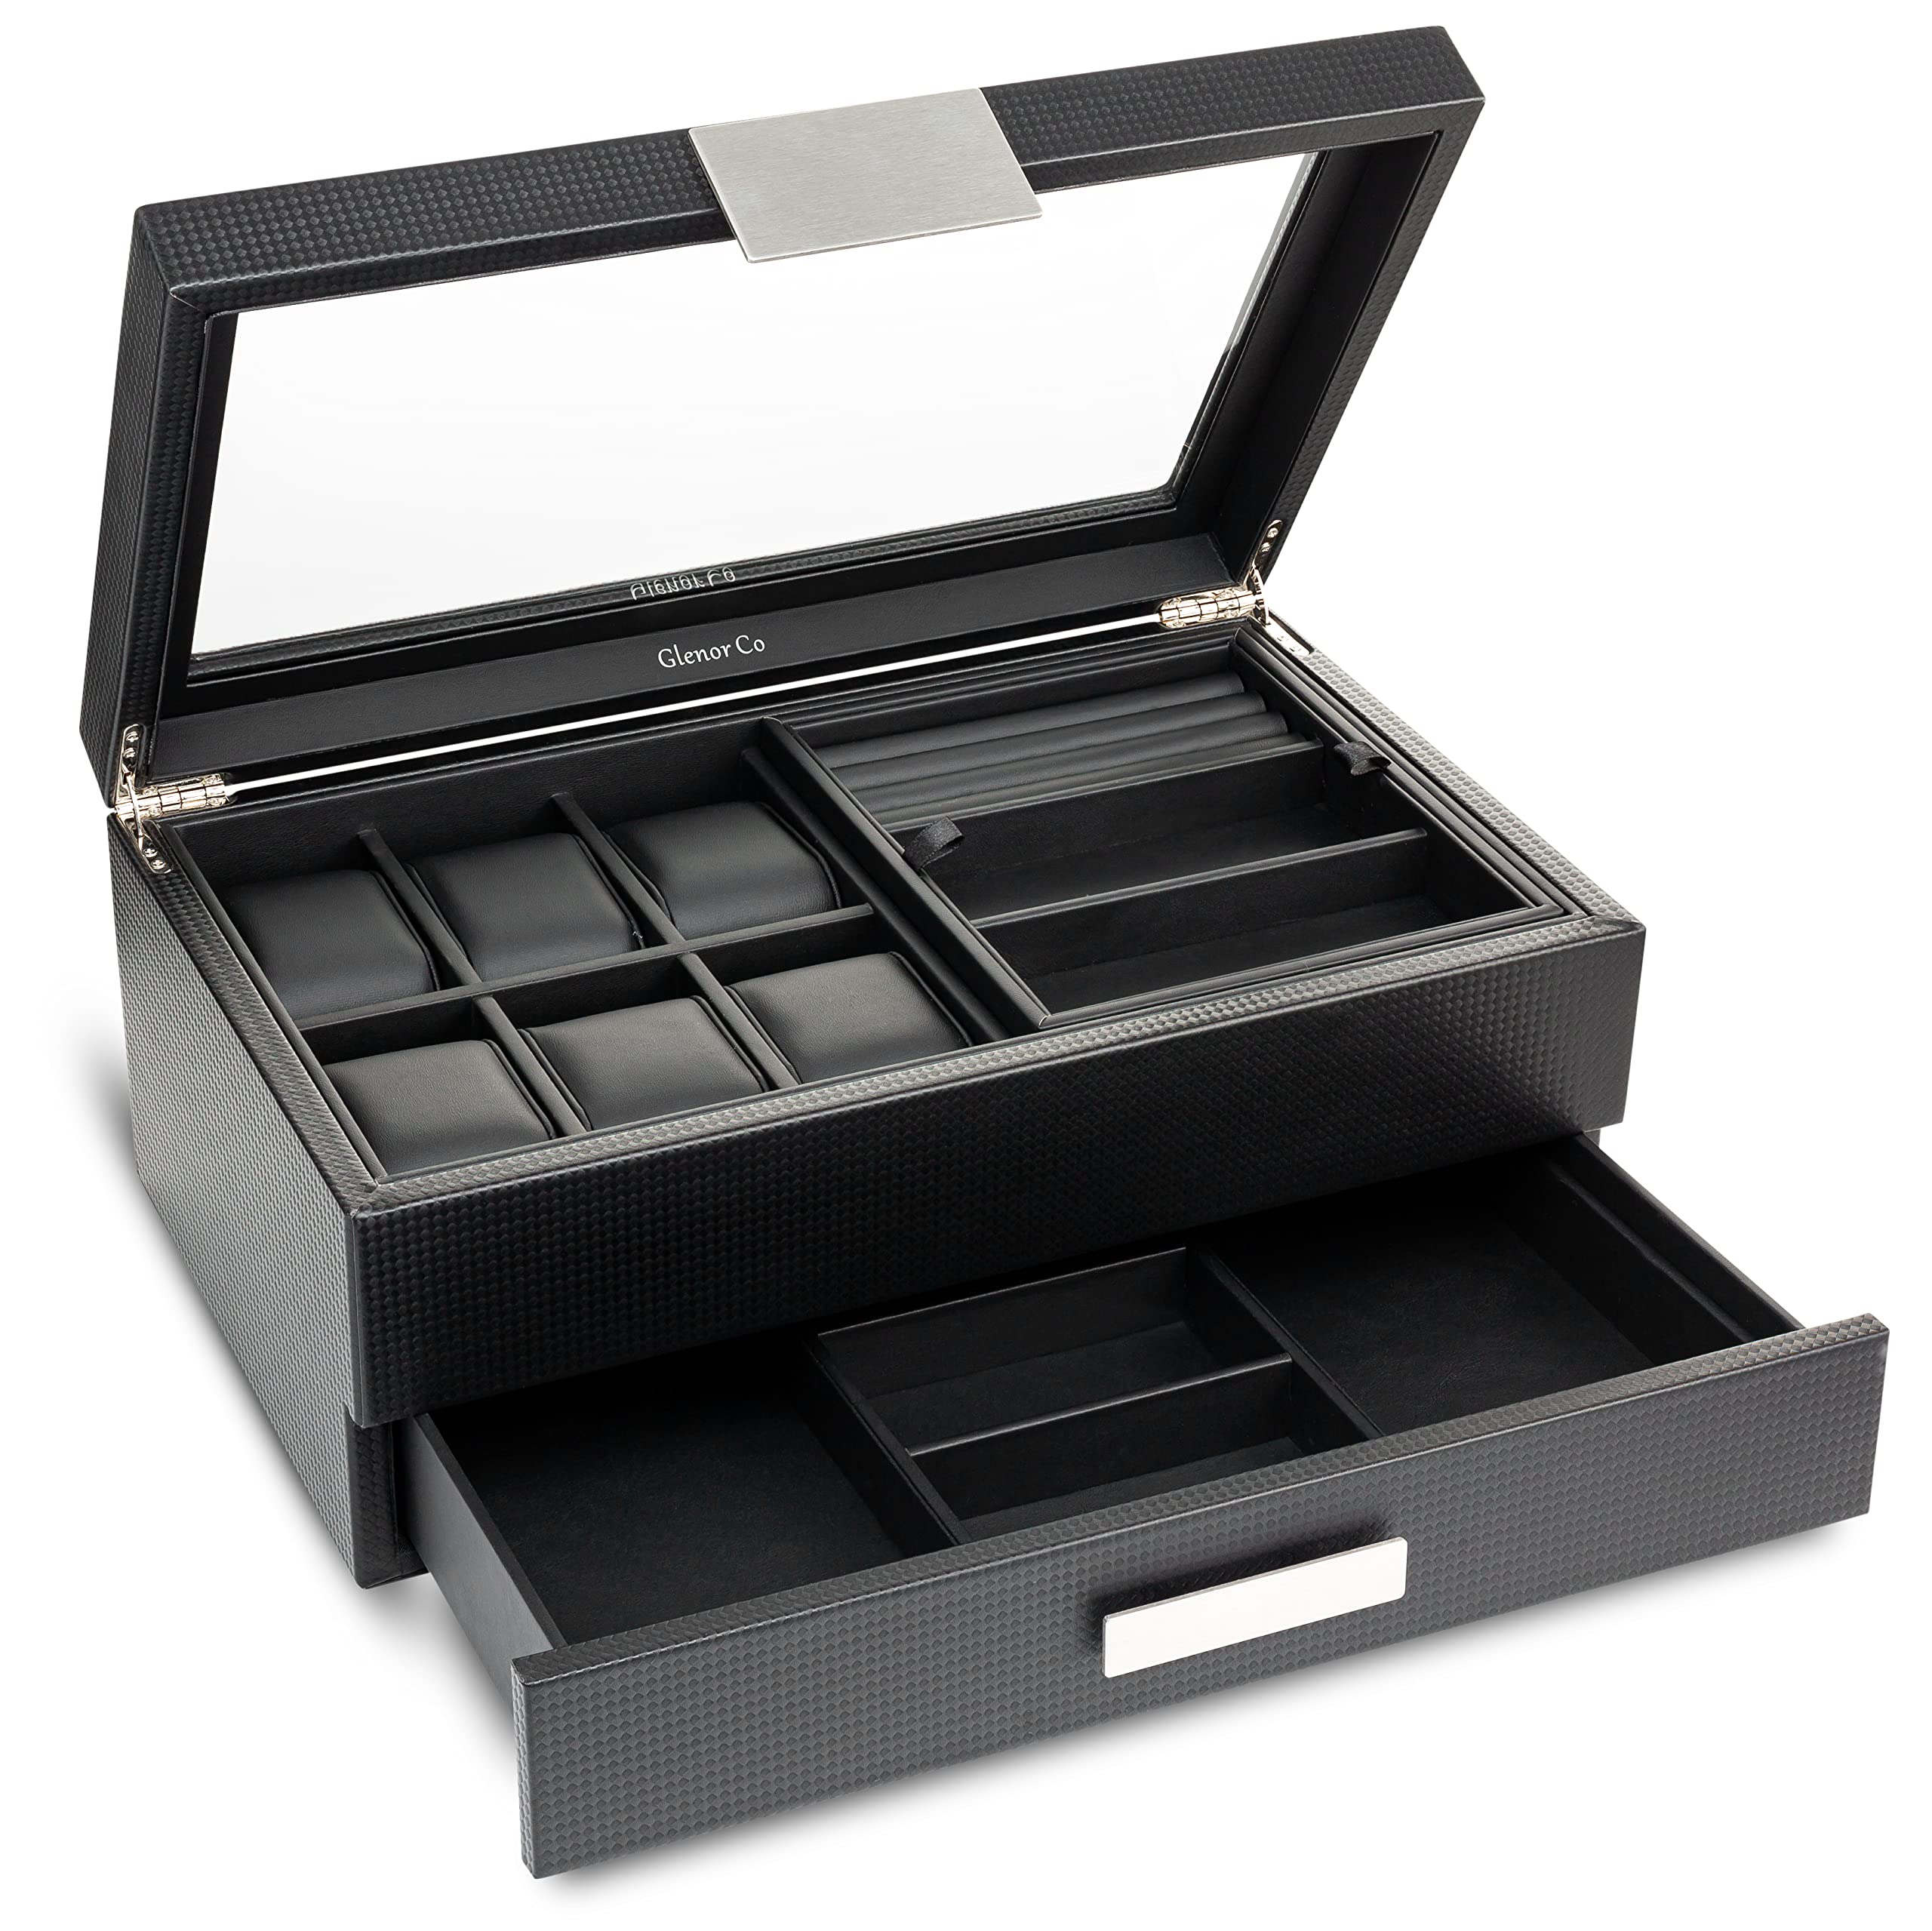 Glenor Co Valet Jewelry Box for Men - Holds 6 Watches, 12 cufflinks, 2 Sunglasses, Drawer & Tray Storage - Mens Watch Case - CarbonFiber Organizer w Metal Accents, PU Leather & Large Glass Lid - Black